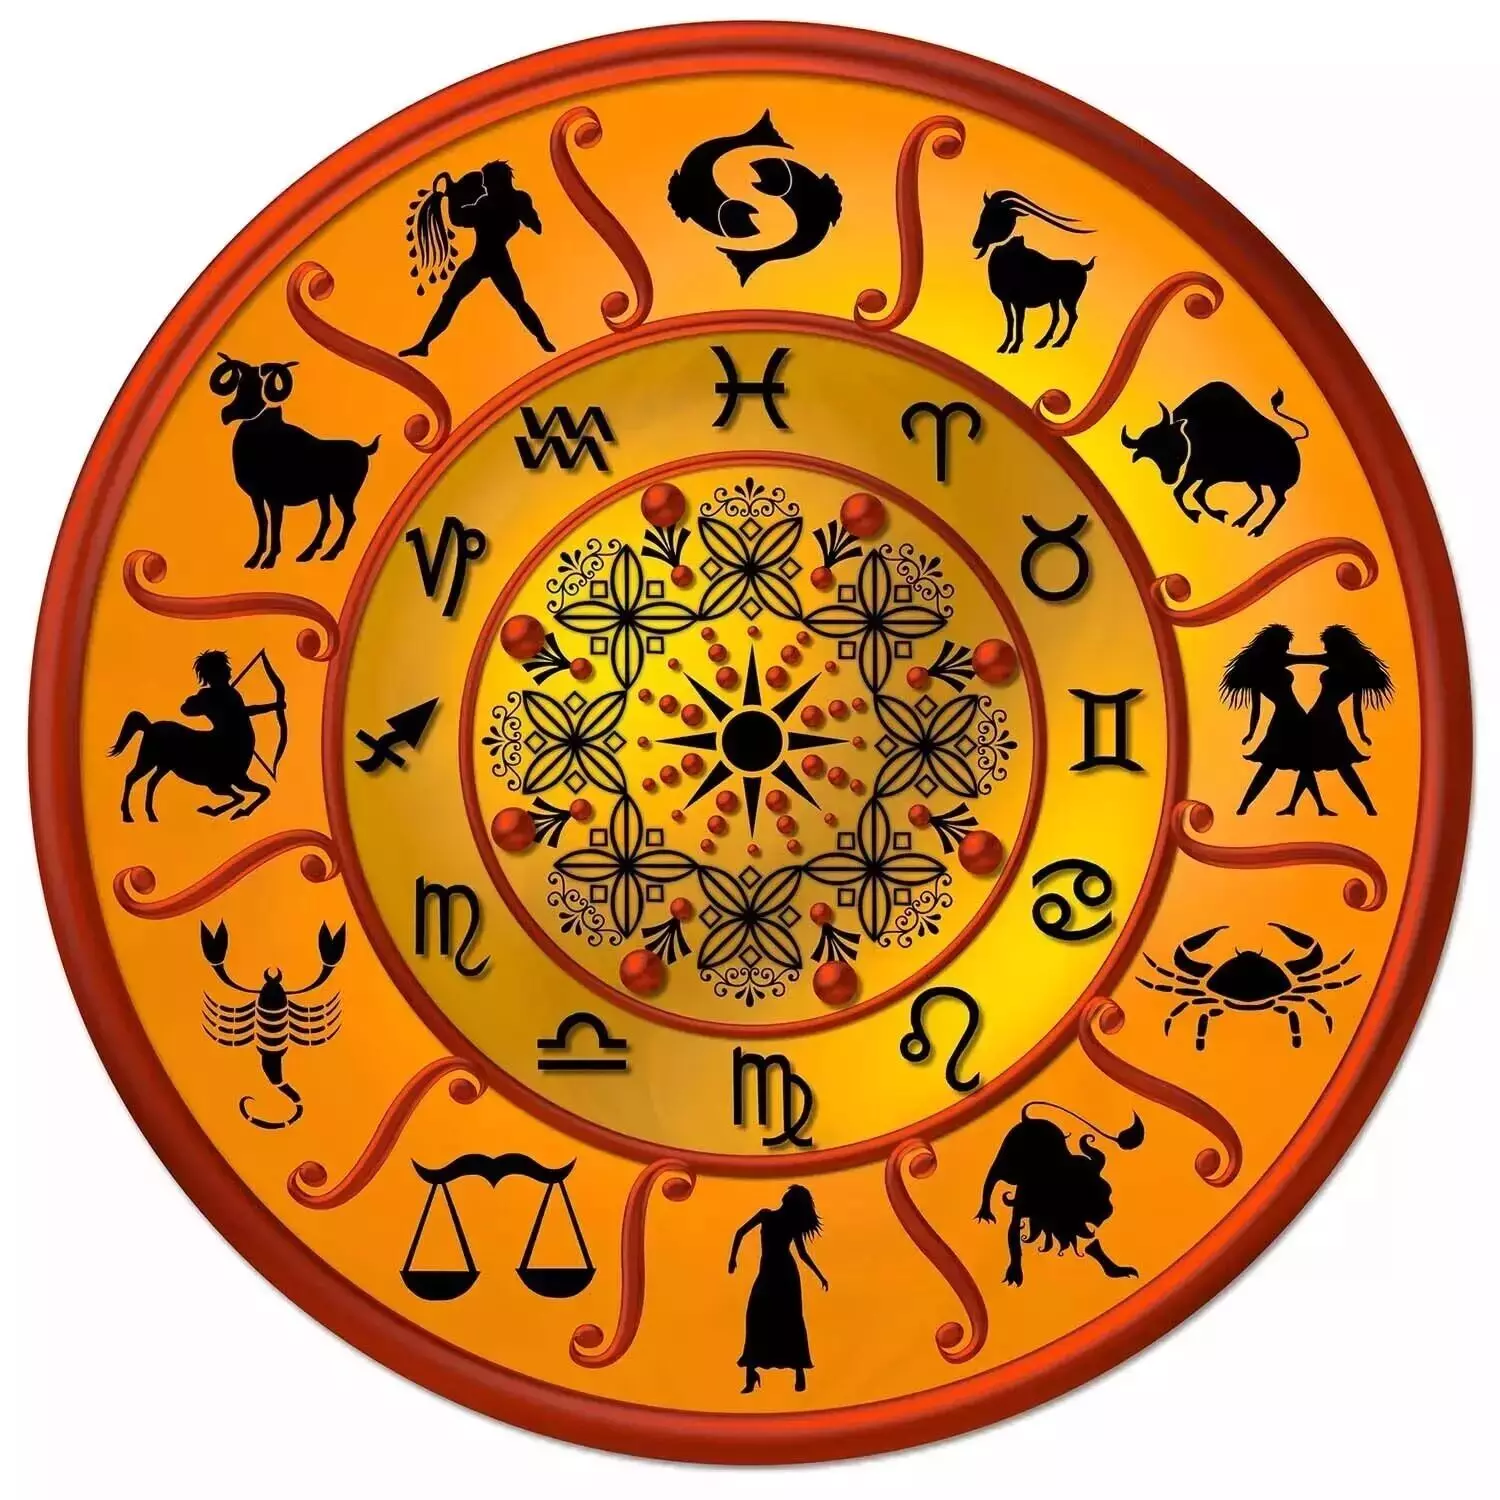 25 June  – Know your todays horoscope